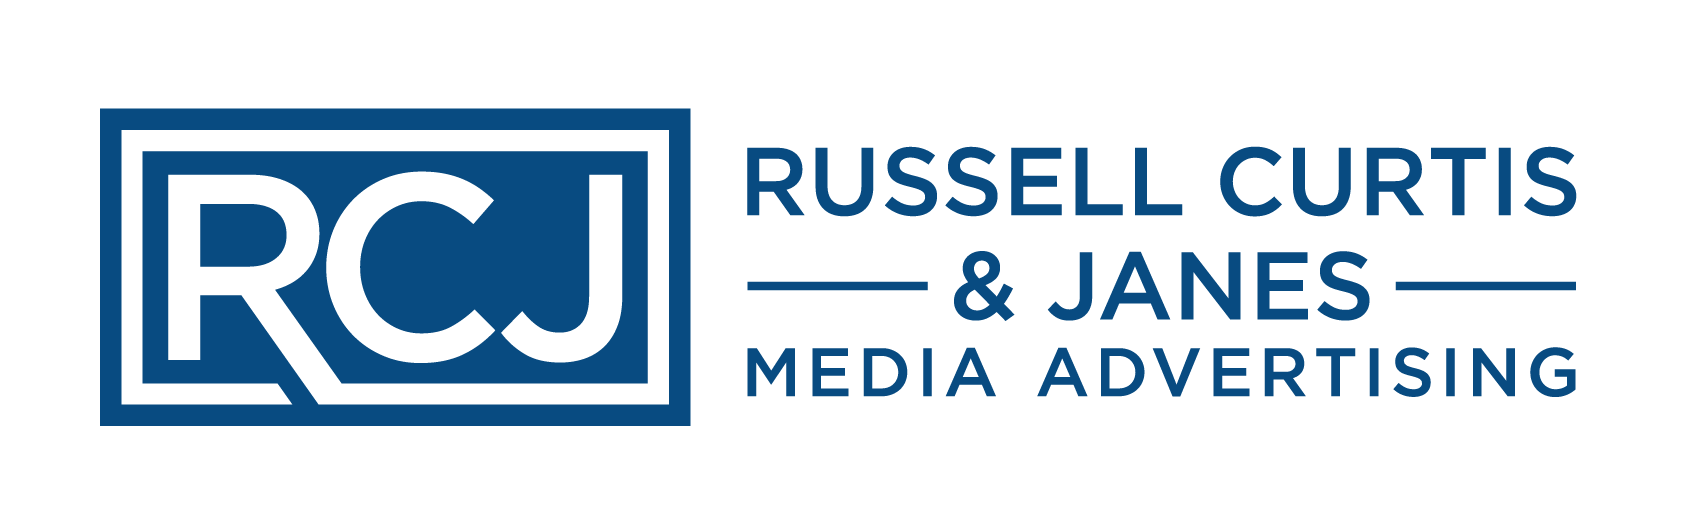 Russell Curtis and Janes Advertising Group Logo